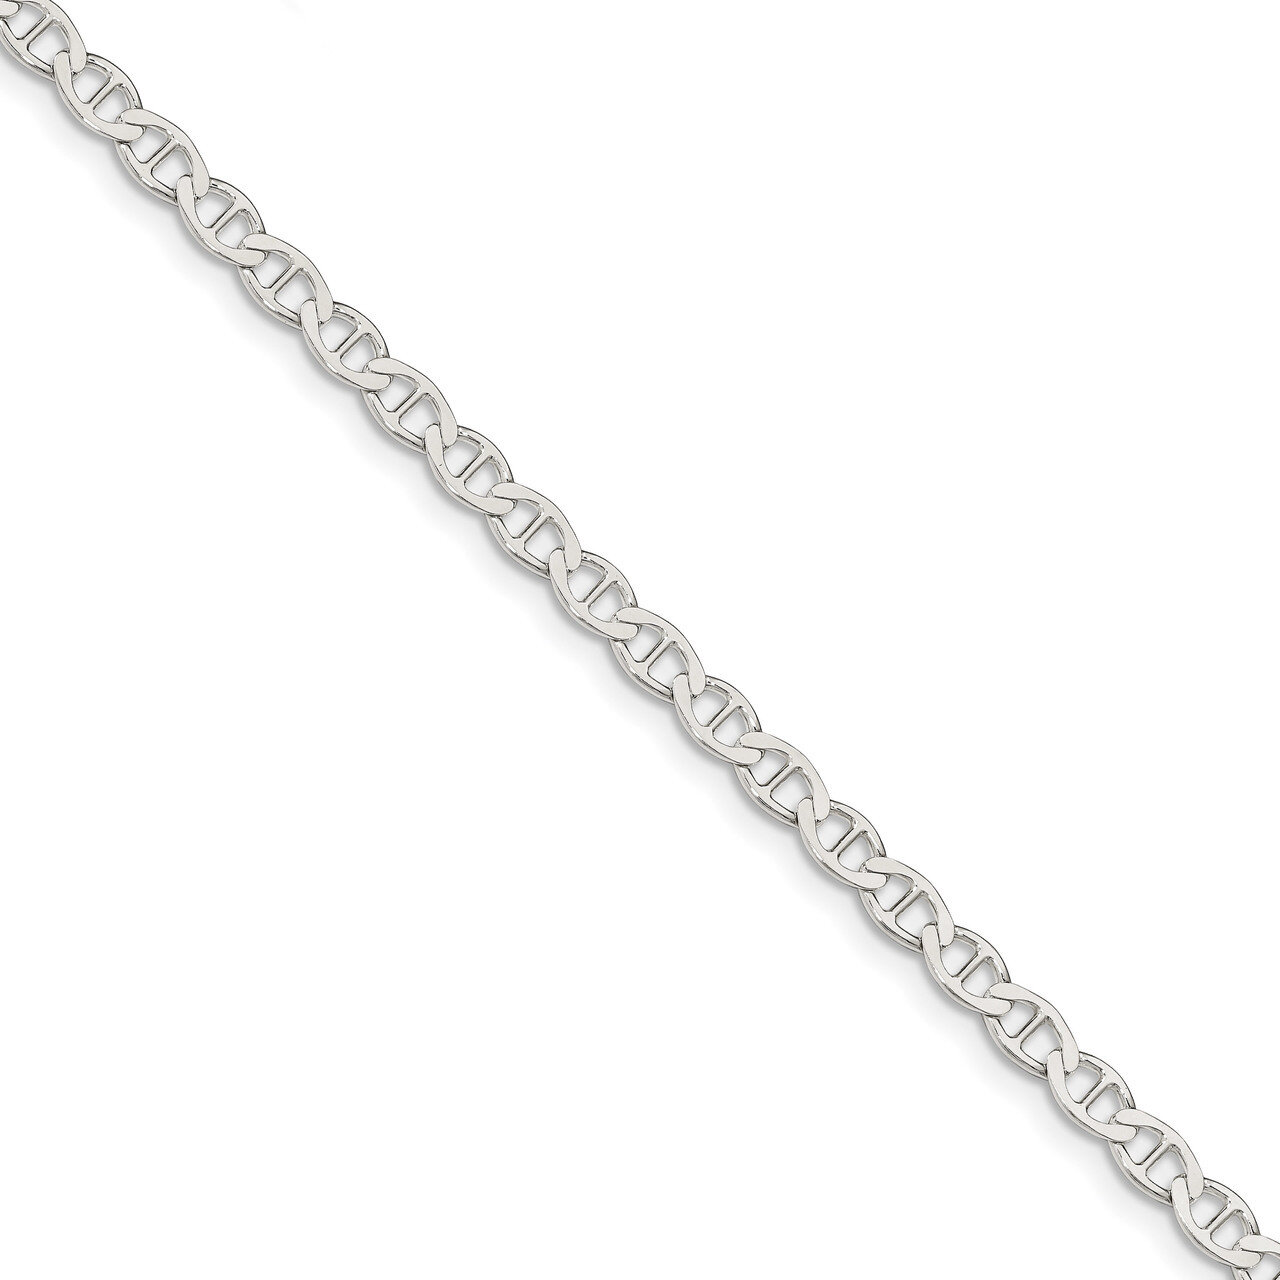 8 Inch 4.75mm Polished Flat Anchor Chain Sterling Silver QLFA100-8